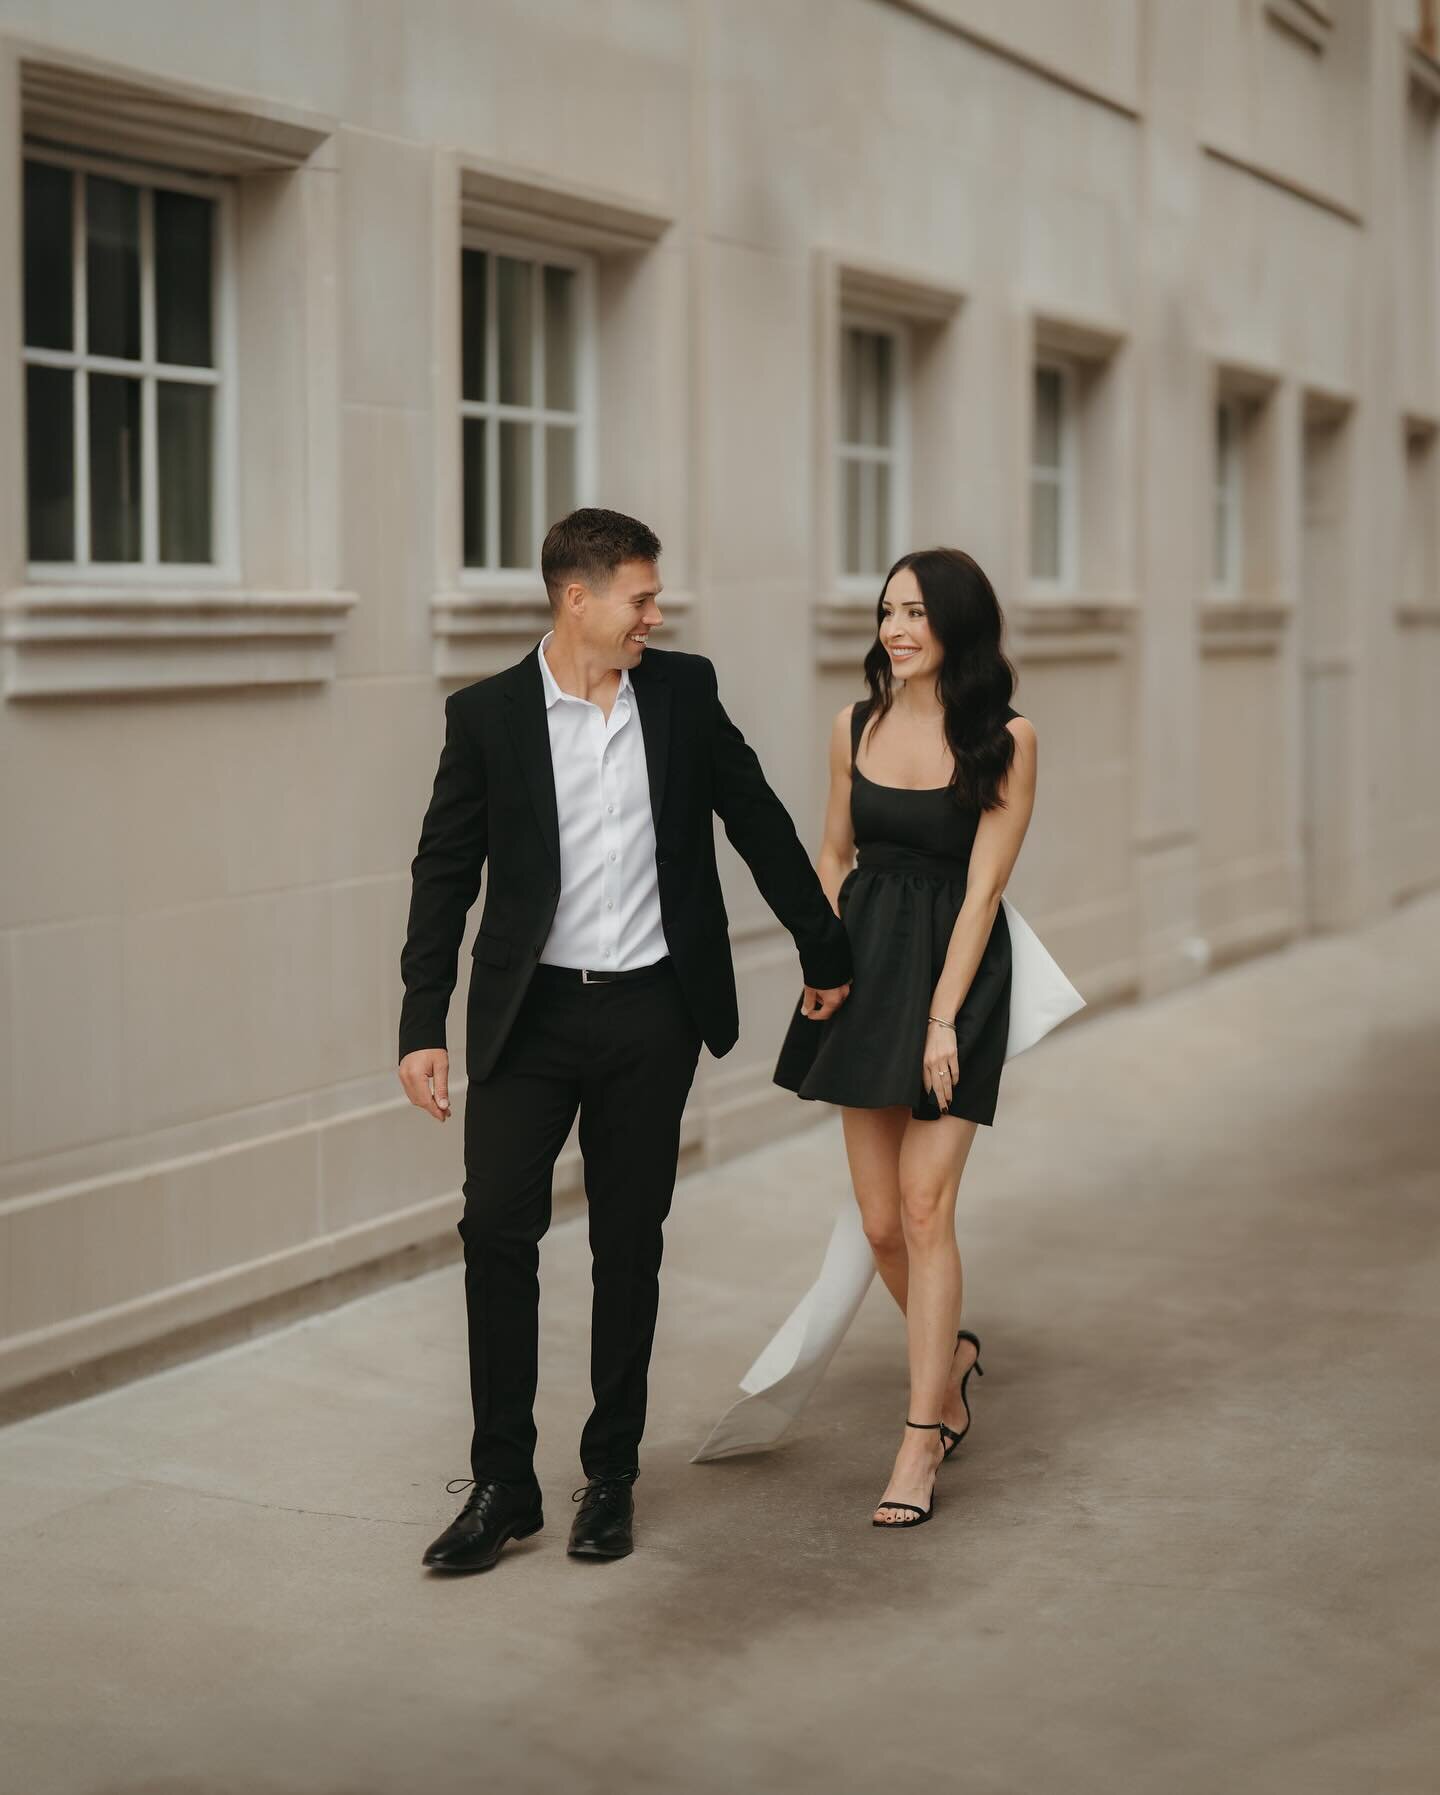 I love you for you, the best. // Zach Bryan

#chasinglight #couplegoals #nikoncreators #nikon #engagement #downtown